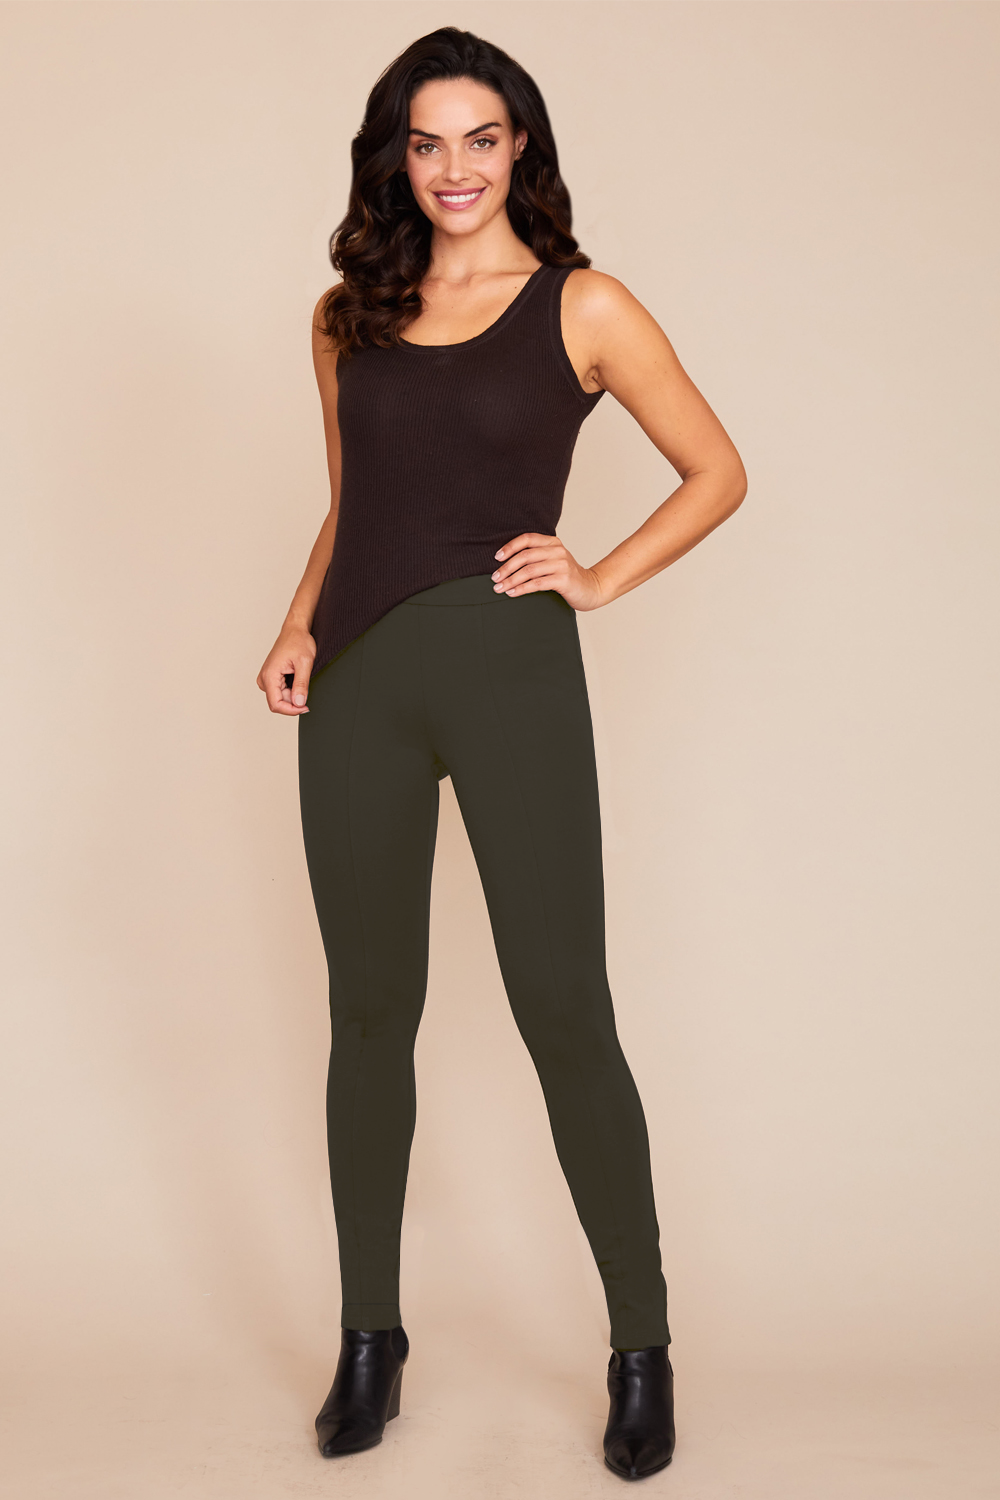 Colby Legging - Paramount Knit